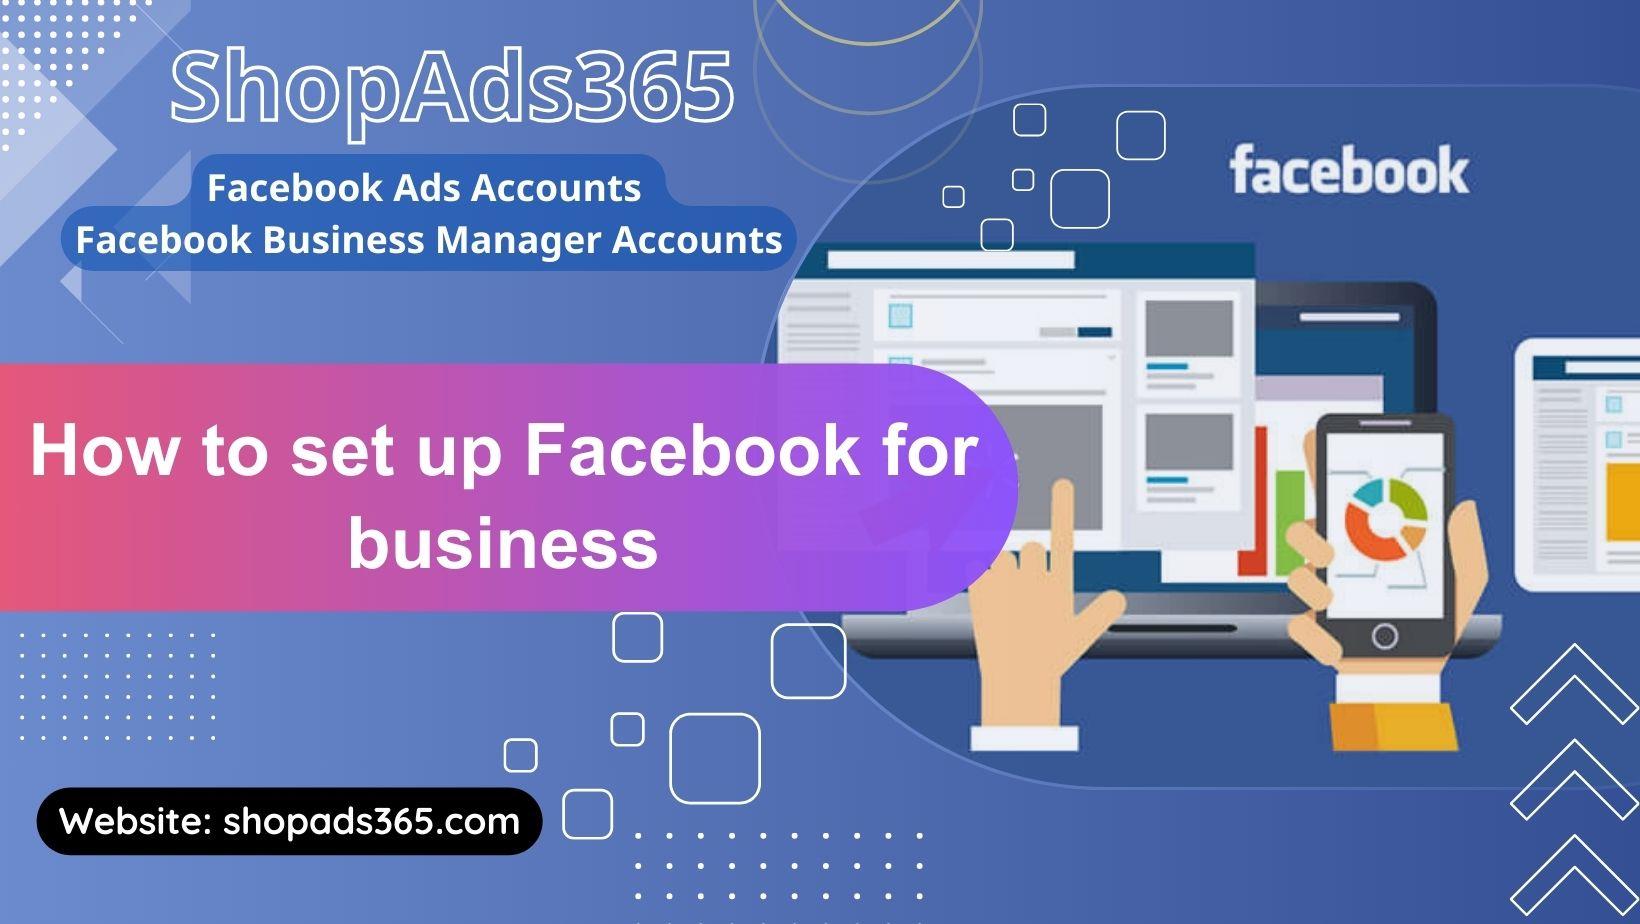 How to set up Facebook for business